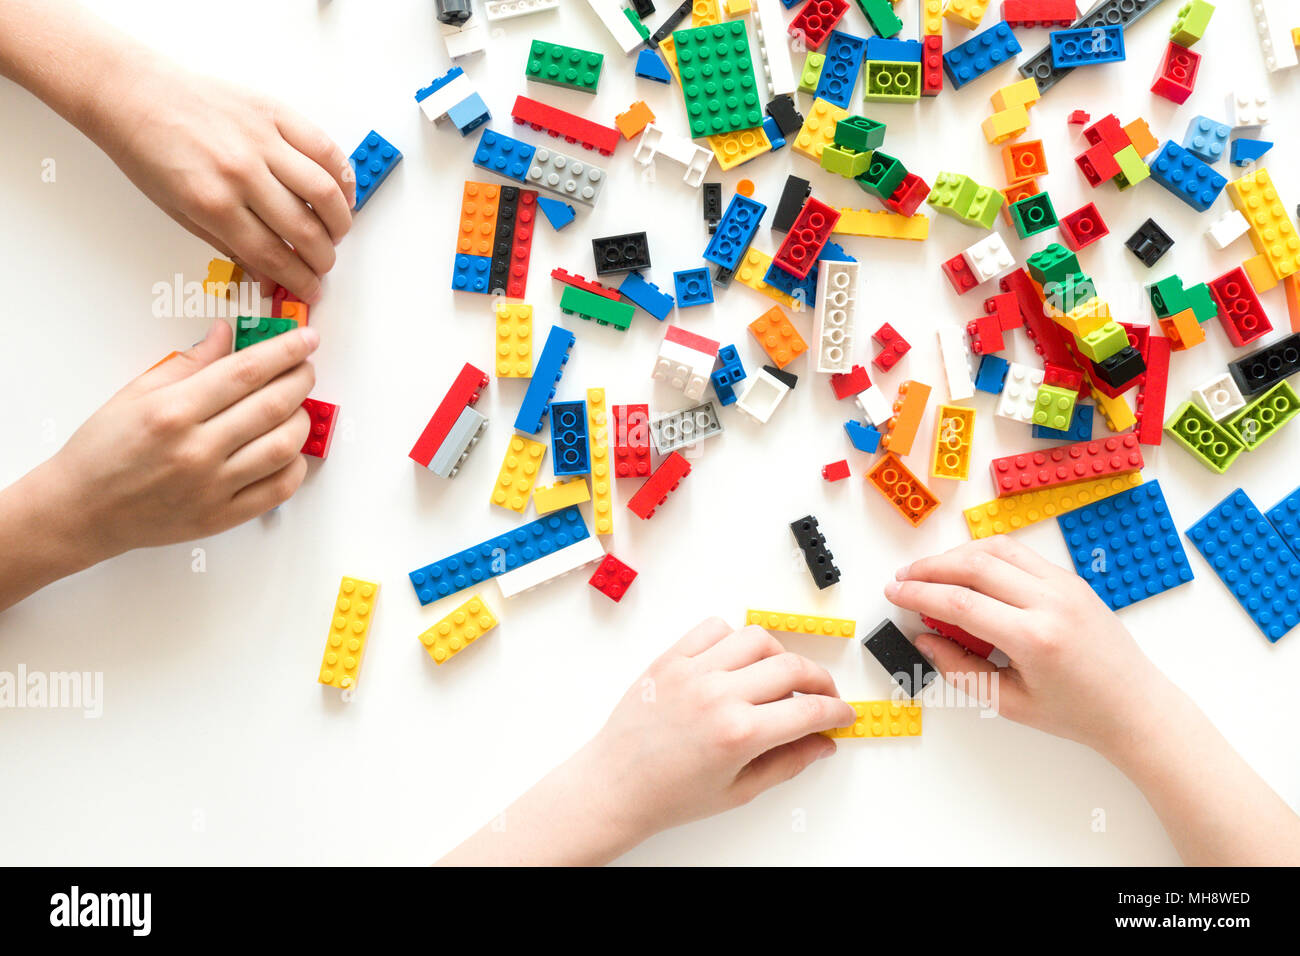 Children hands play with colorful lego blocks on white table. Stock Photo